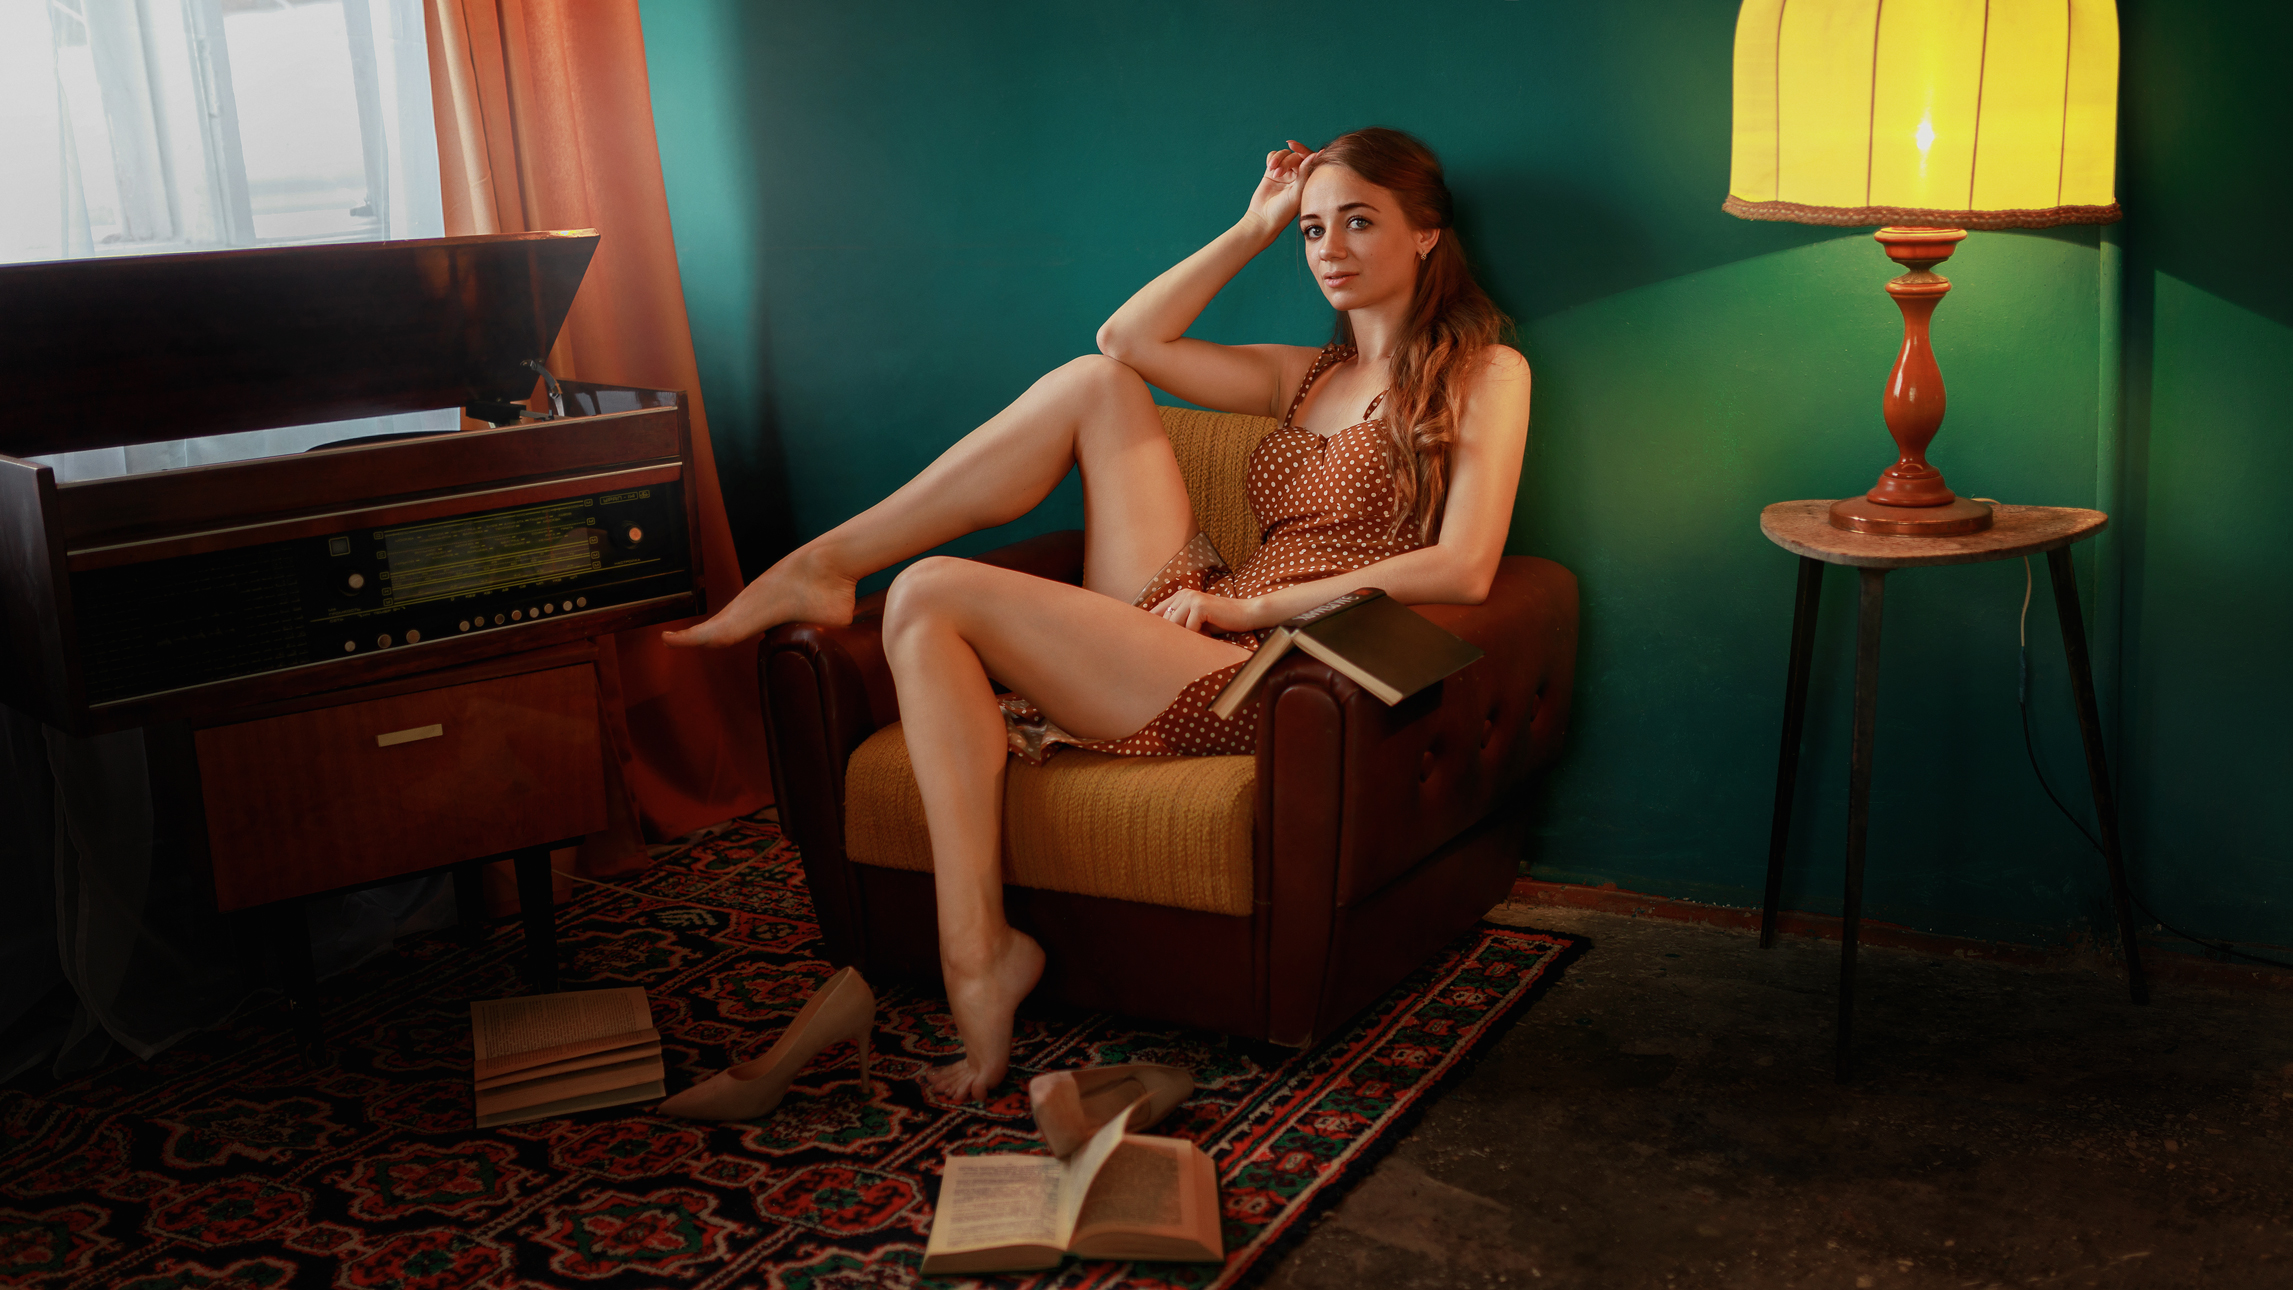 People 2293x1290 Aleksey Yuriev women dress dots barefoot messy stereos looking at viewer books model legs tiptoe women indoors retro style